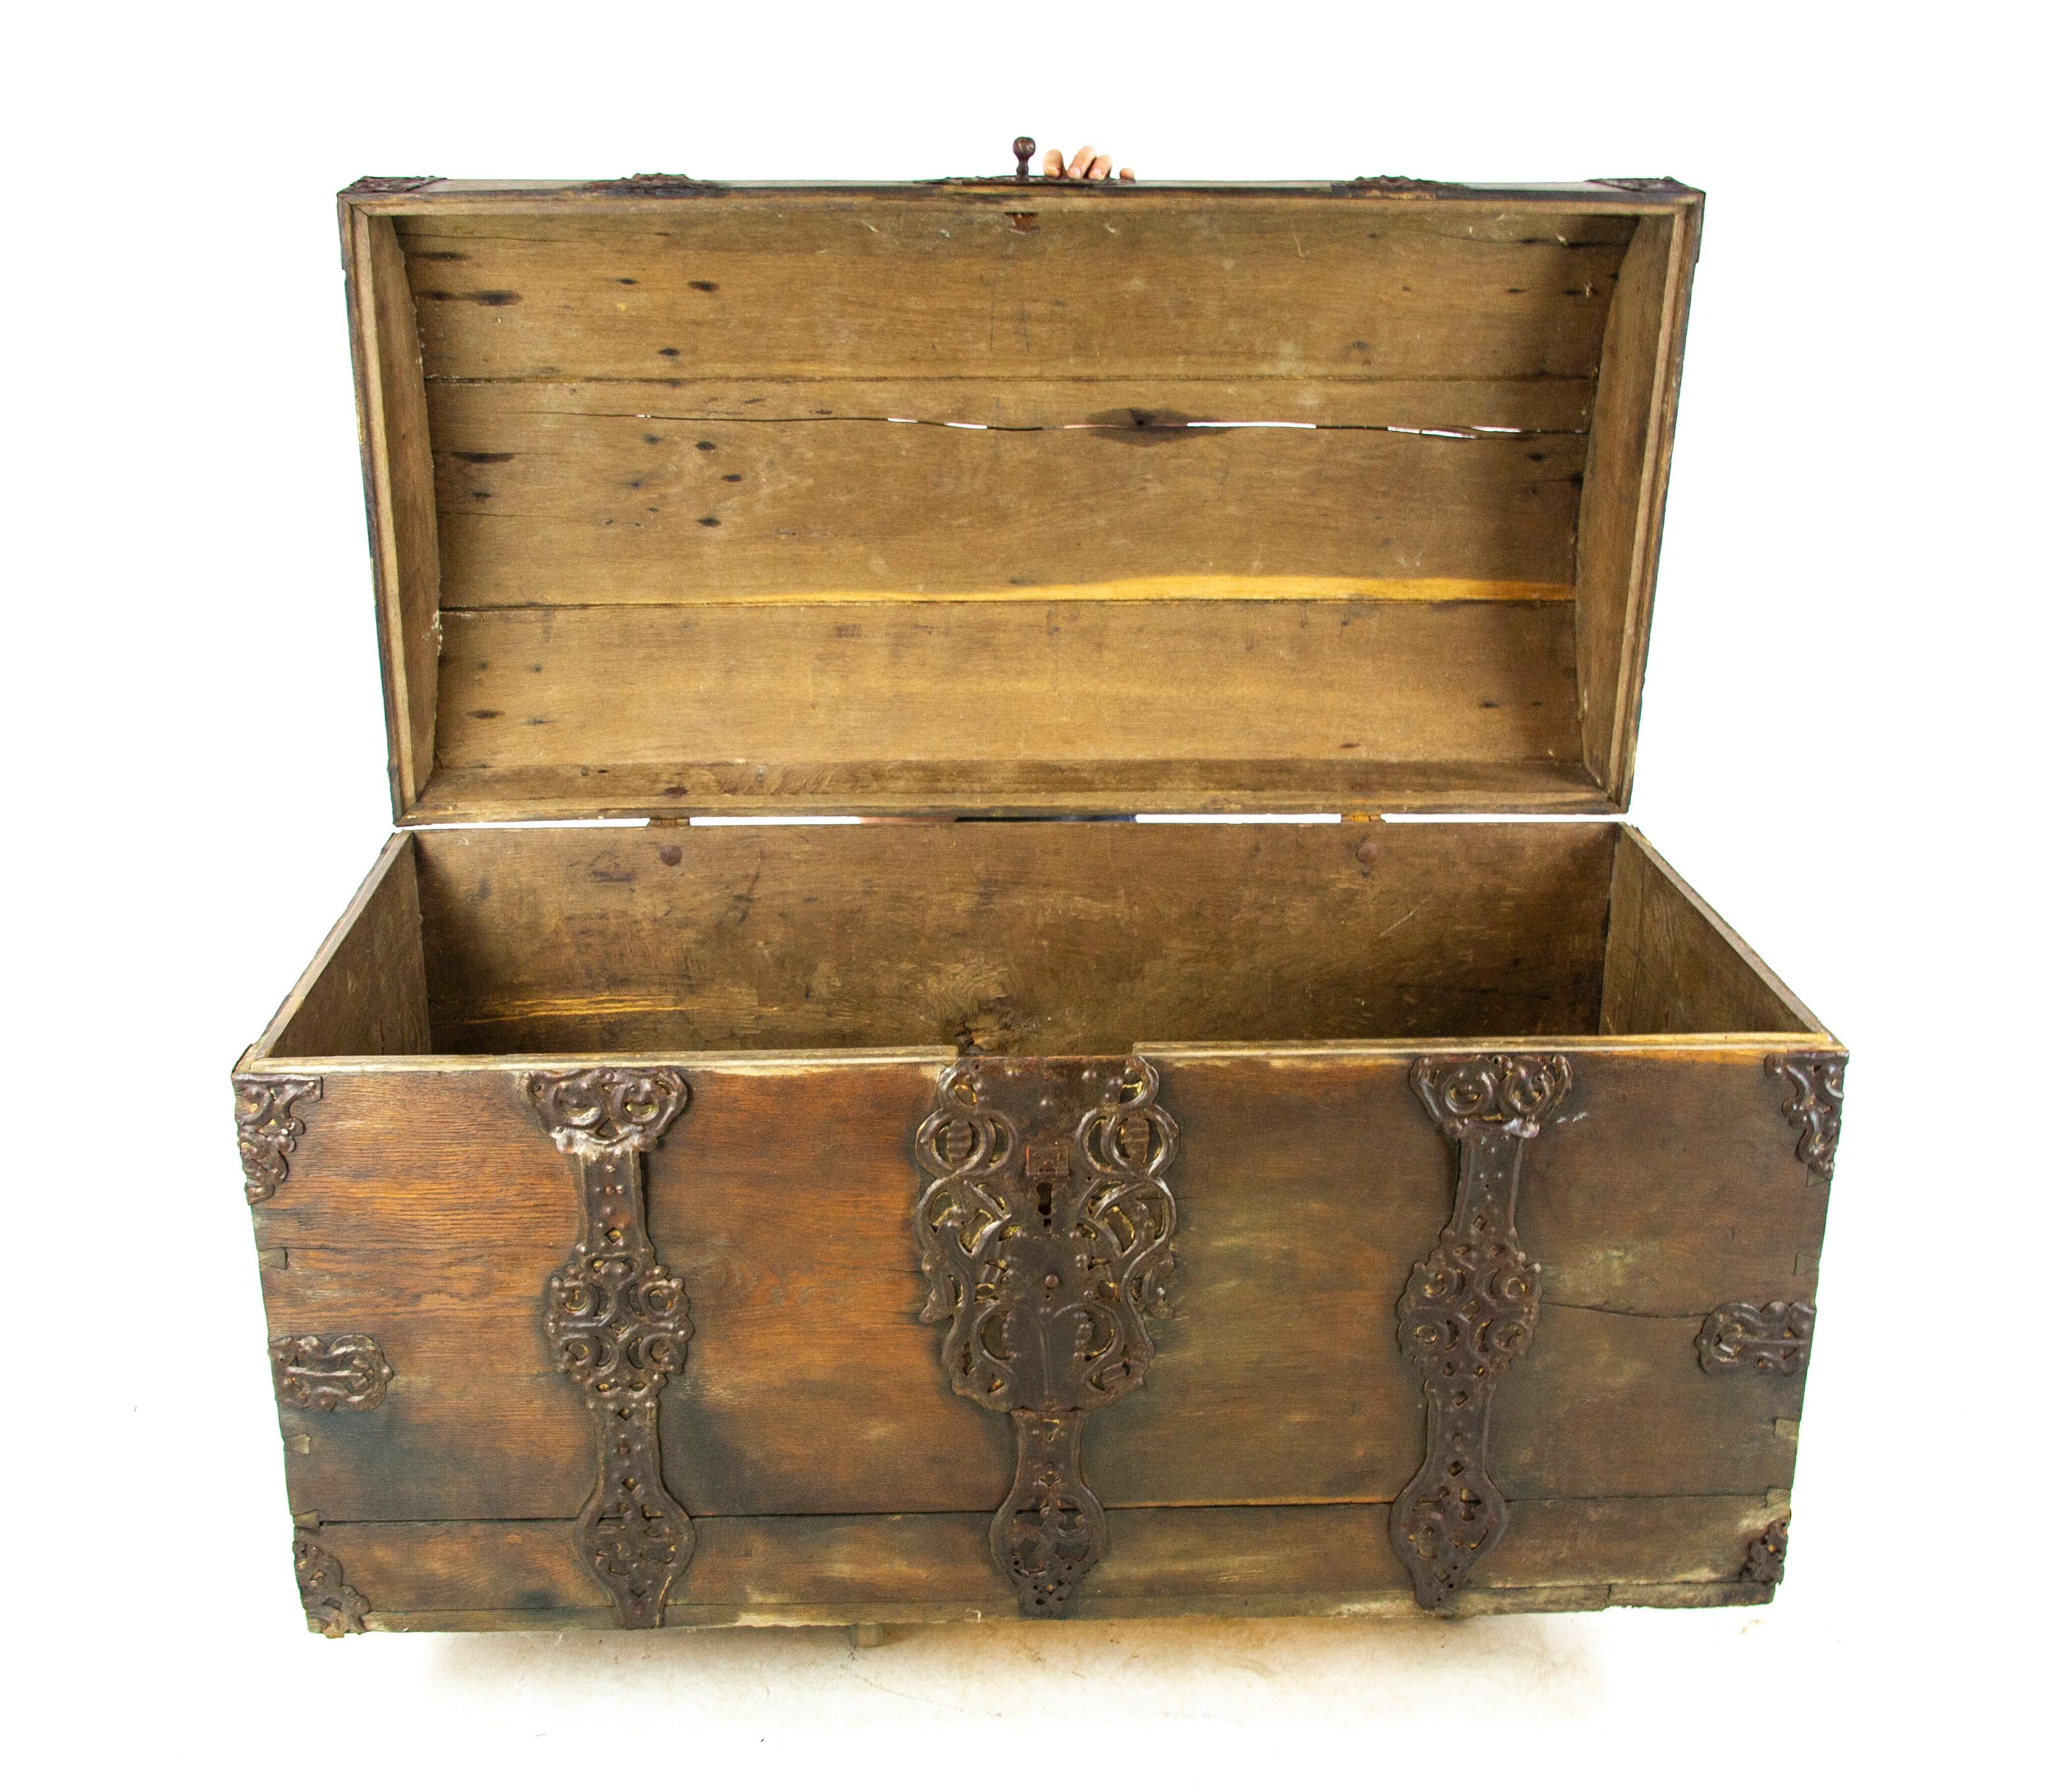 Antique wooden trunk, 18th century oak German dome top wooden coffer, Antique furniture, Germany 1780, B1500

Germany 1780
Solid oak construction
Original finish
Splits to the top are due to age related shrinkage
Decorated with metal straps and